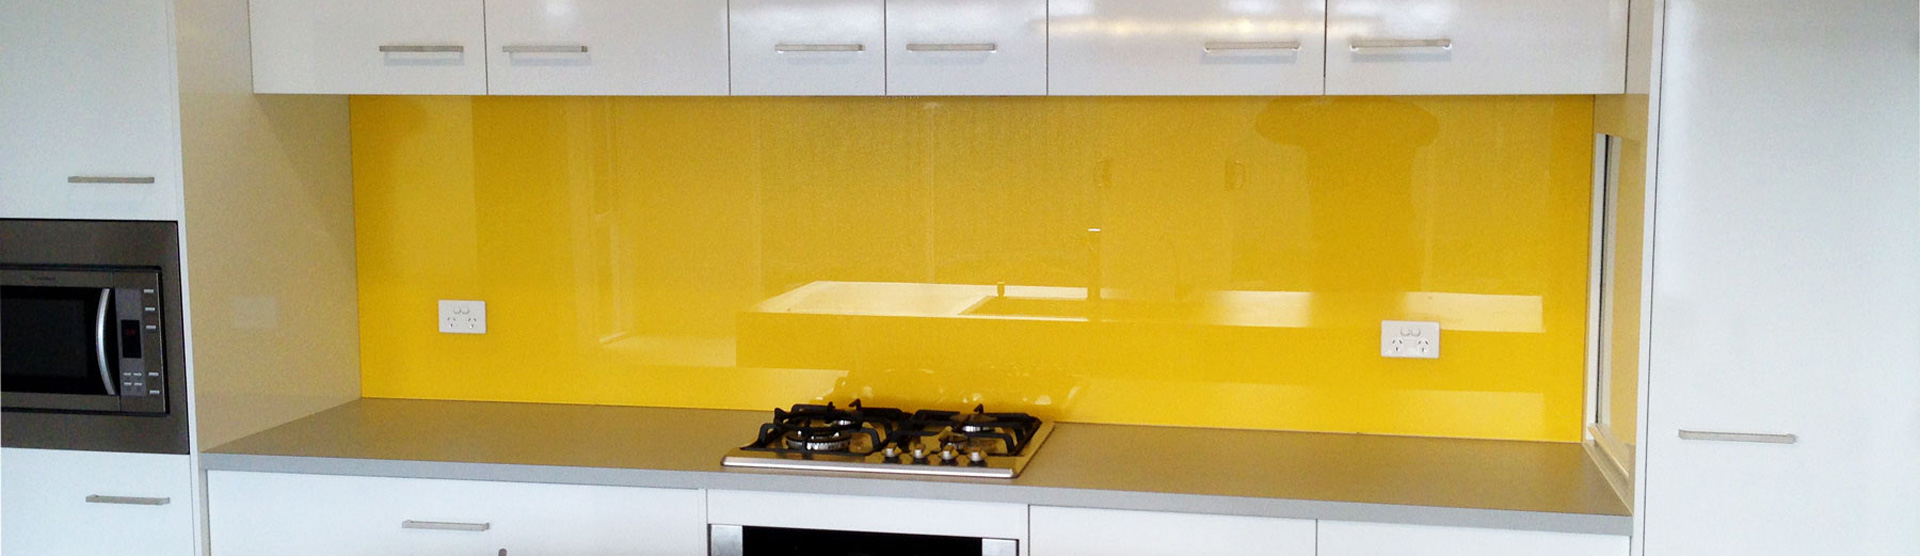 Glass splash backs - bright clean and easy to maintain